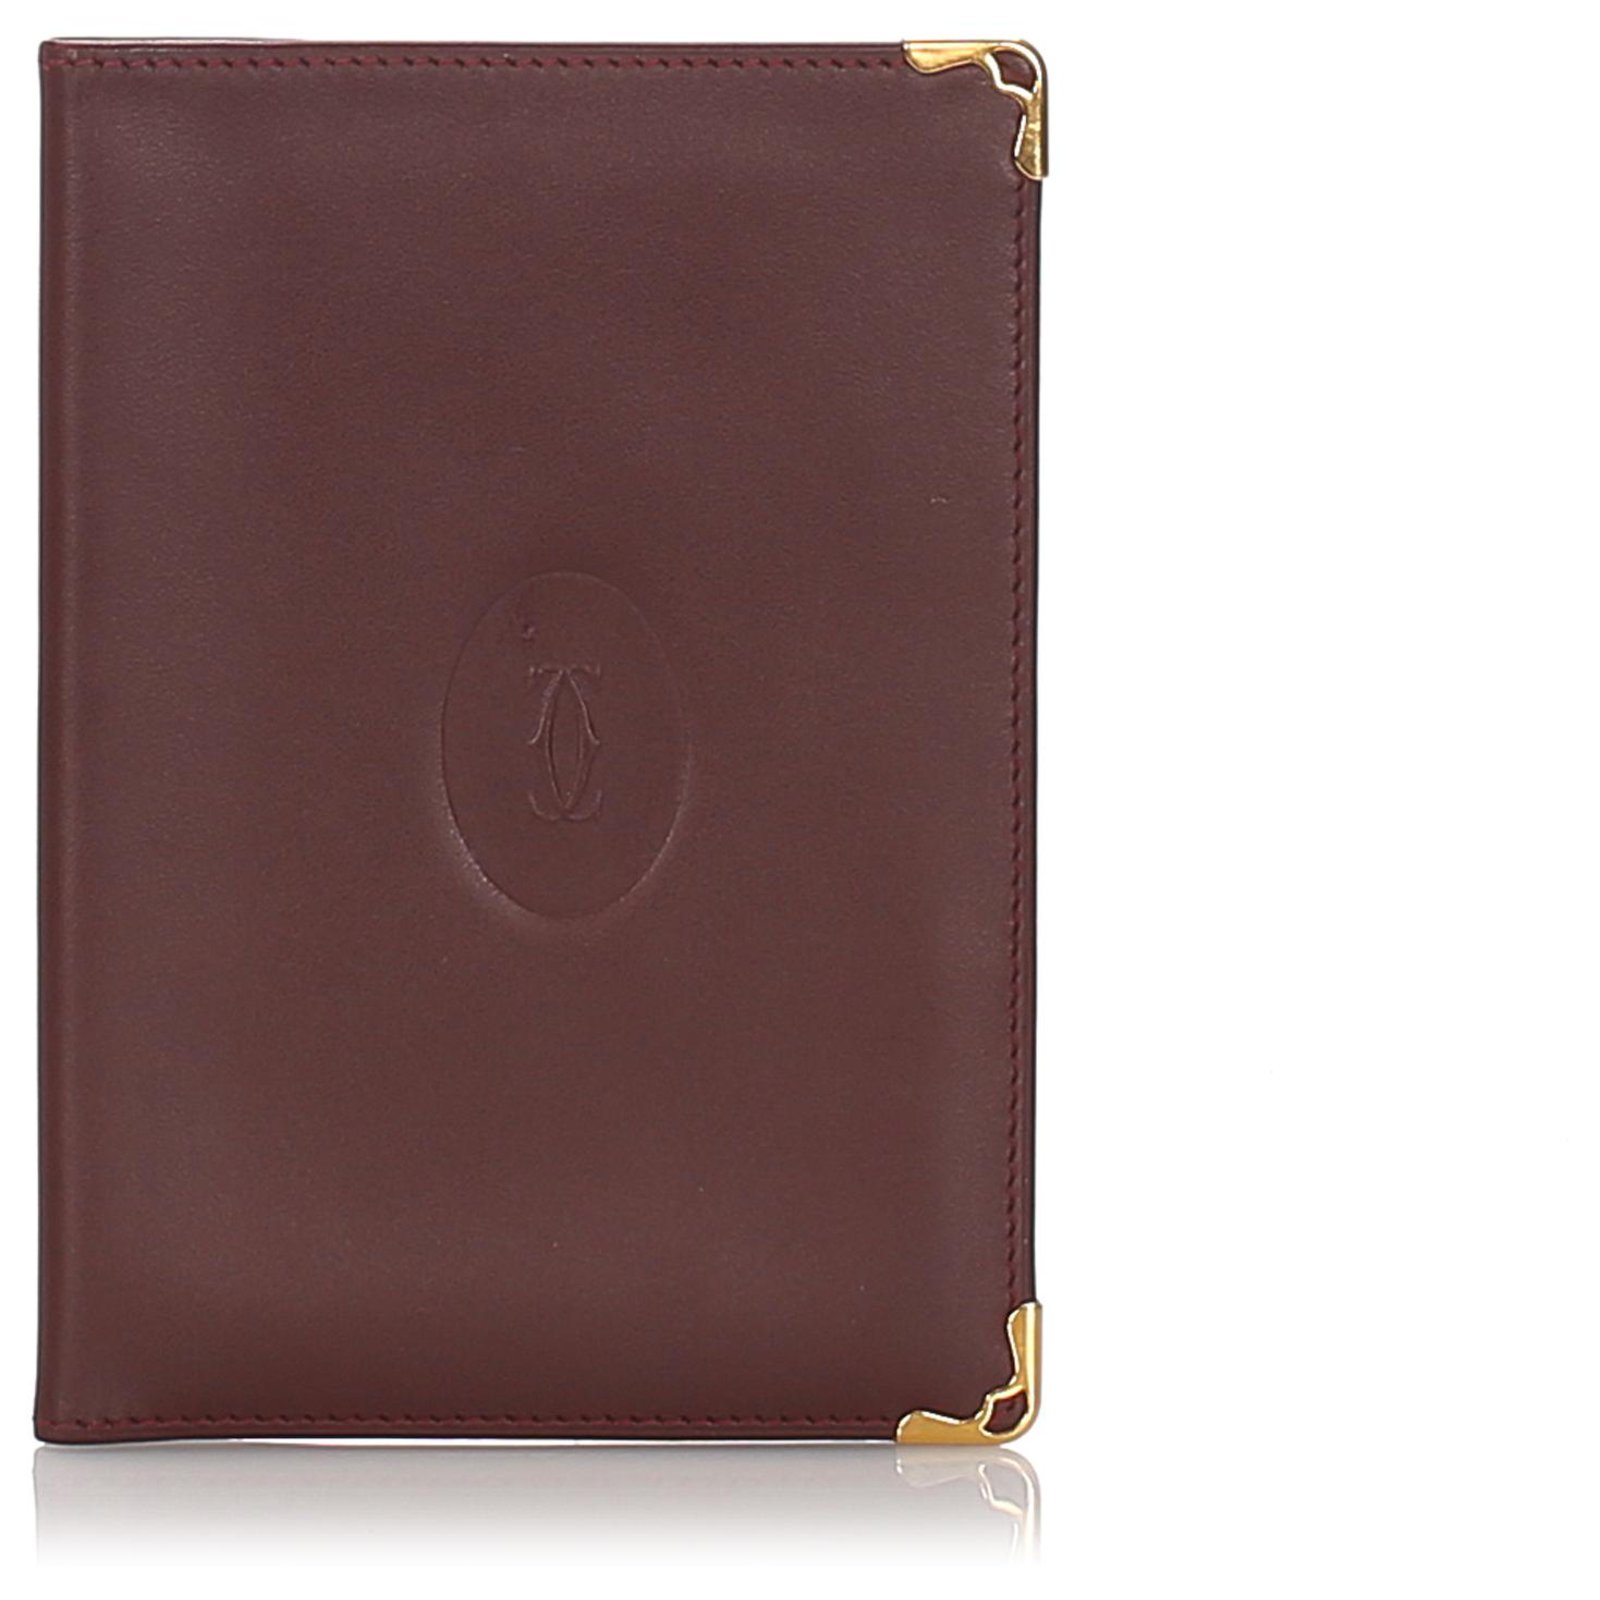 cartier leather notebook